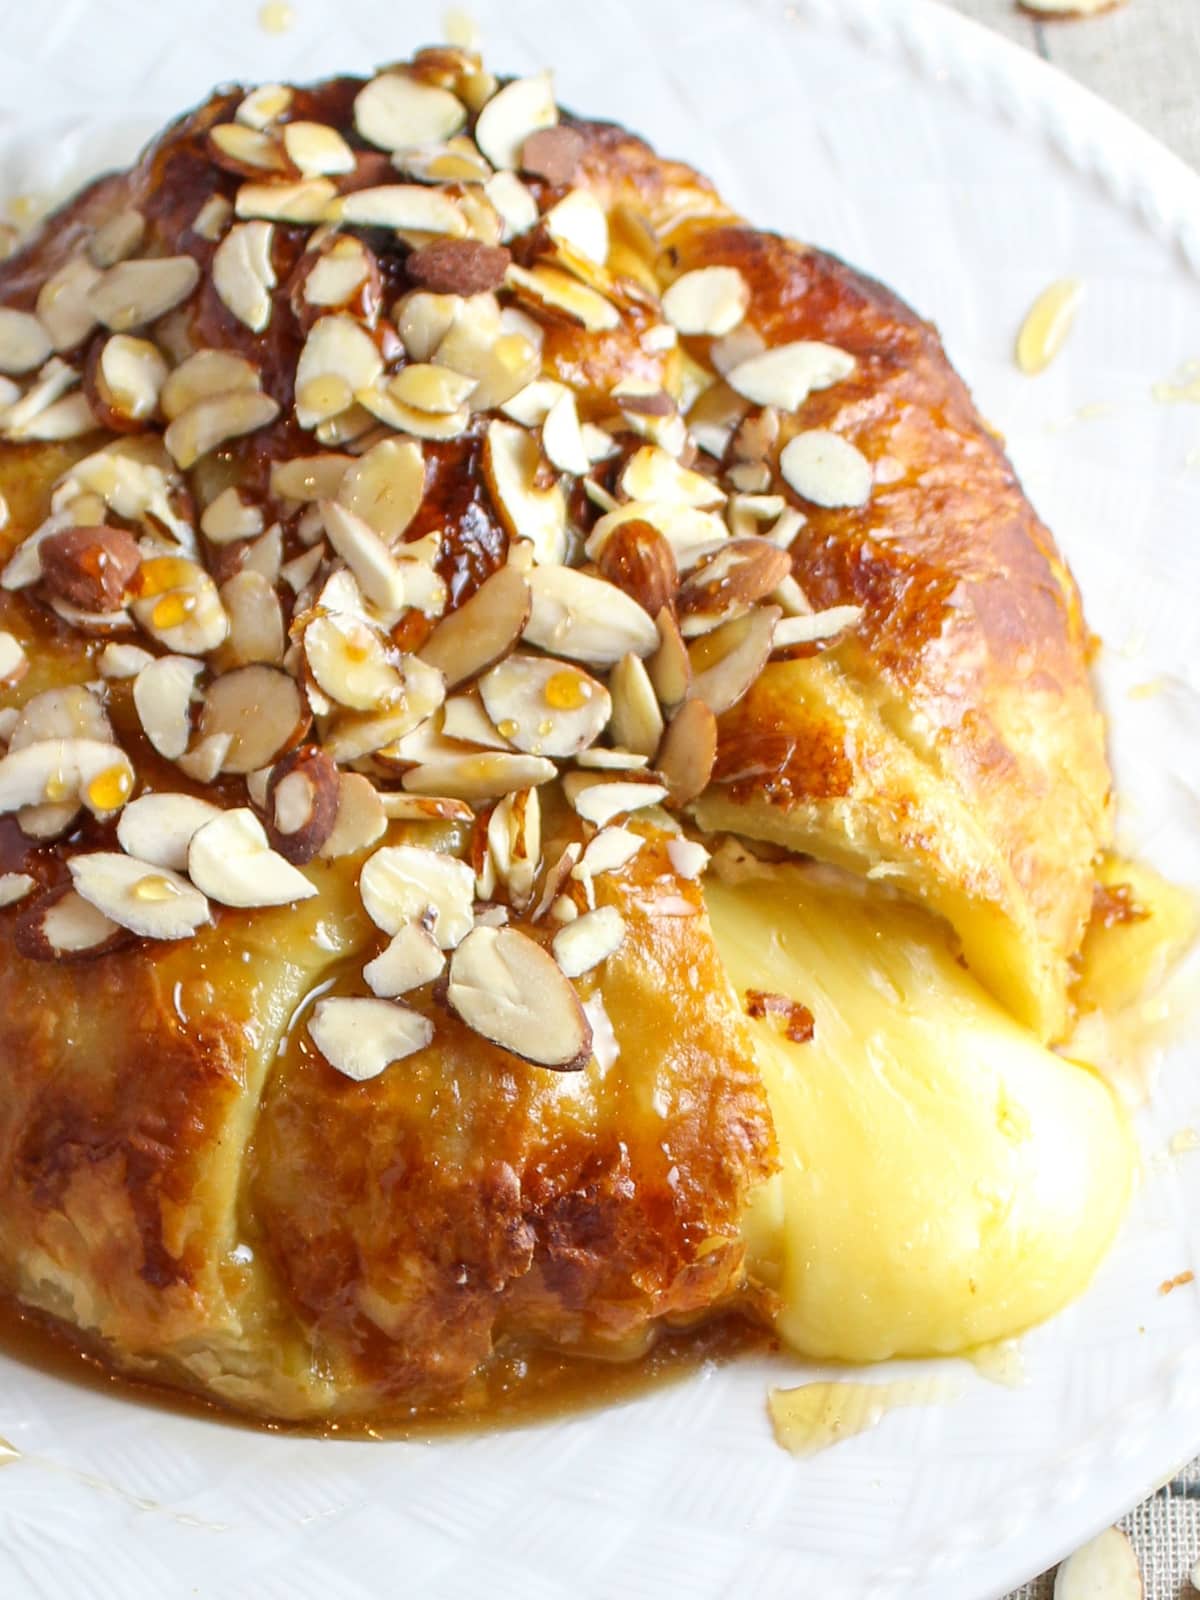 Baked Brie in Puff Pastry with Honey and Almonds